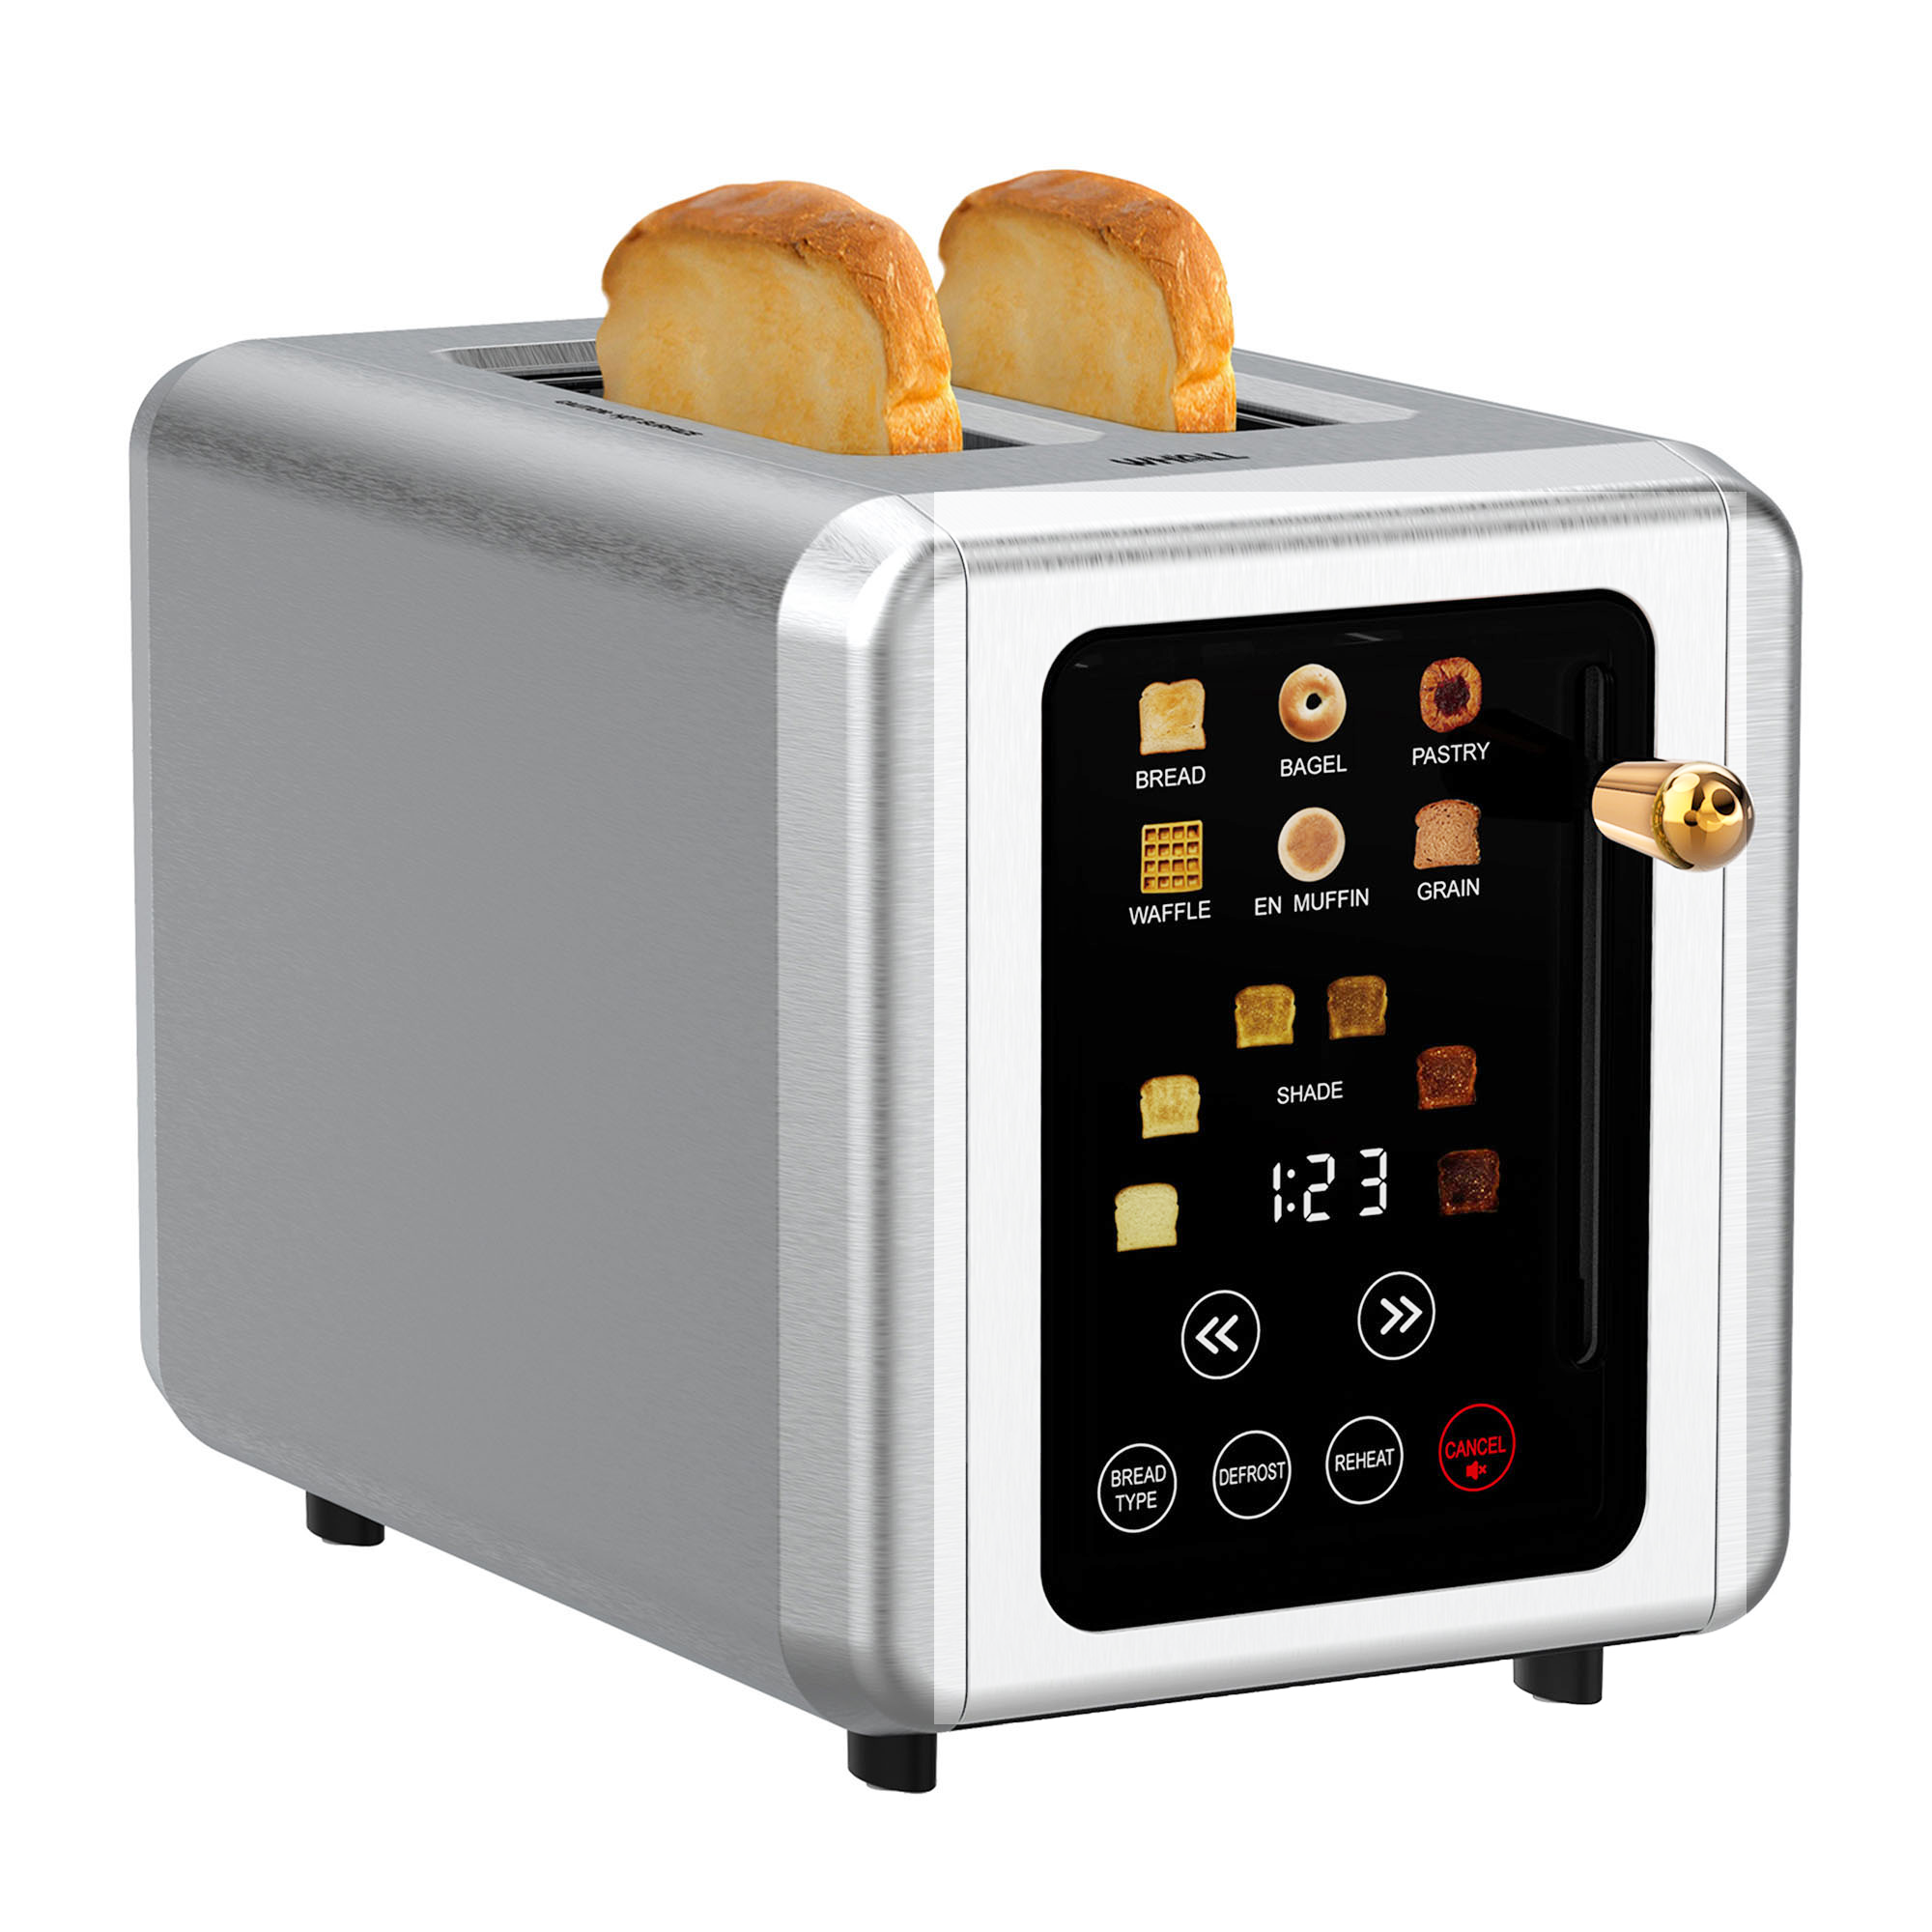 WHALL® 2 Slice Touch Screen Toaster - Stainless Steel Toaster with Wide Slot, 6 Shade Settings, Bagel Function, Removable Crumb Tray